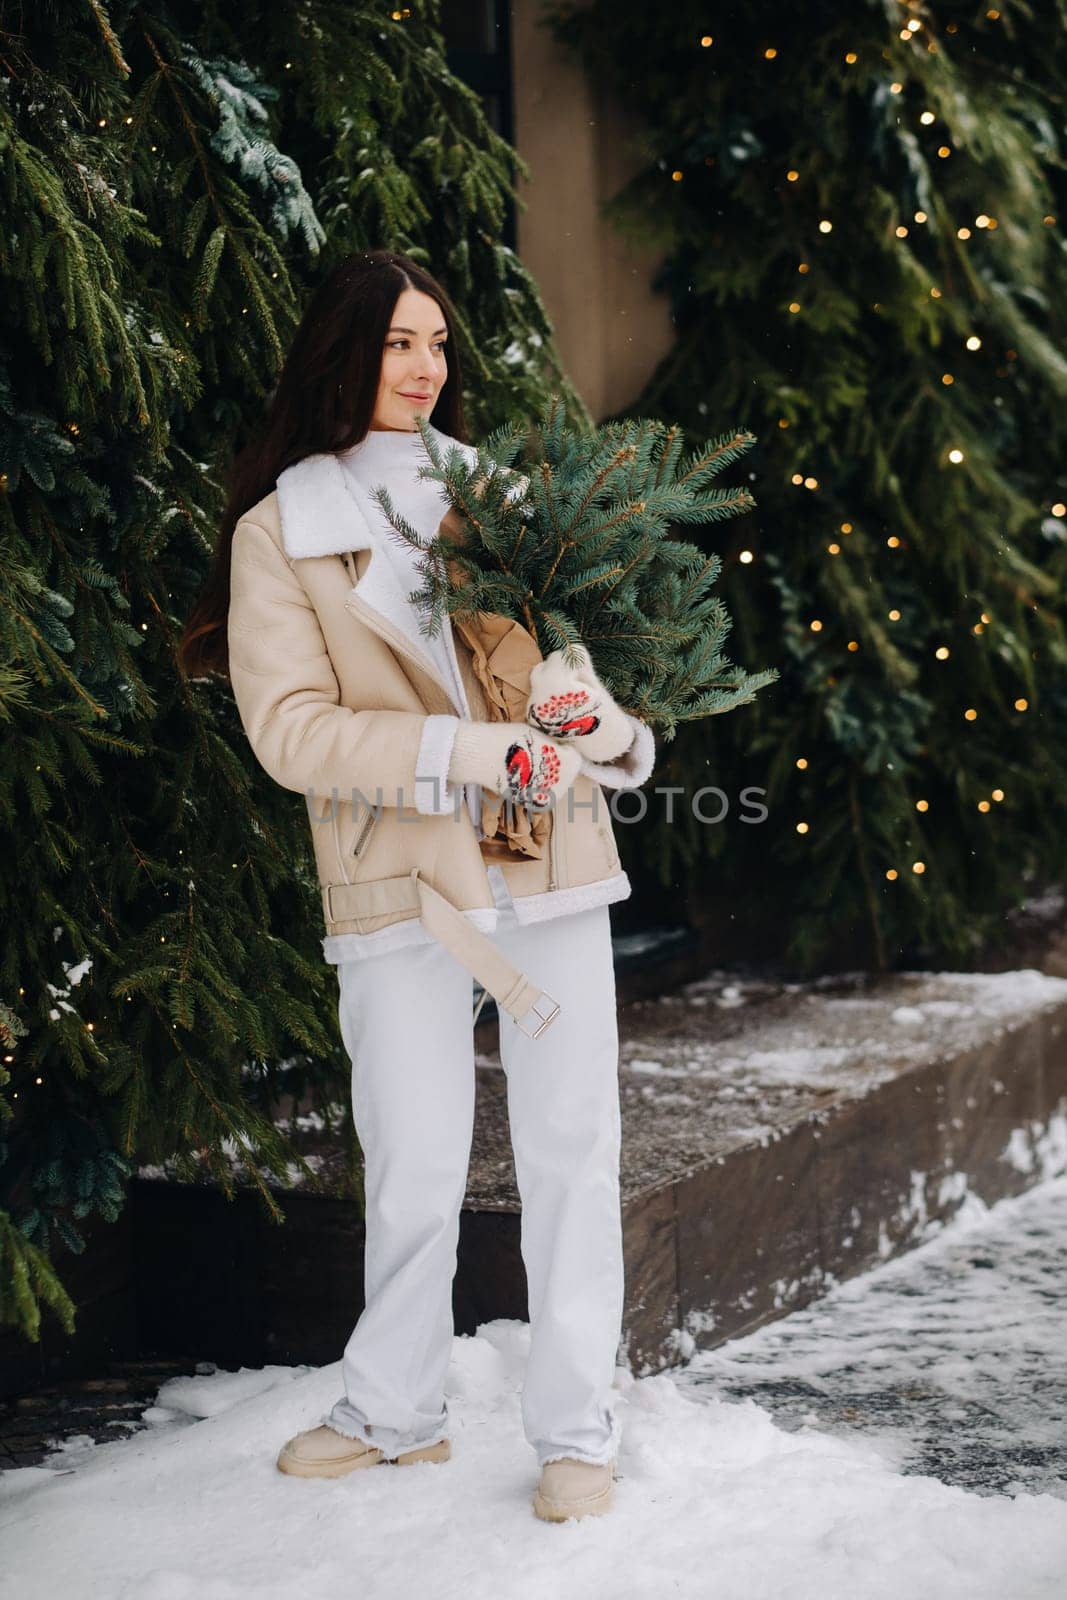 A girl with long hair in winter on the street with a bouquet of fresh fir branches by Lobachad